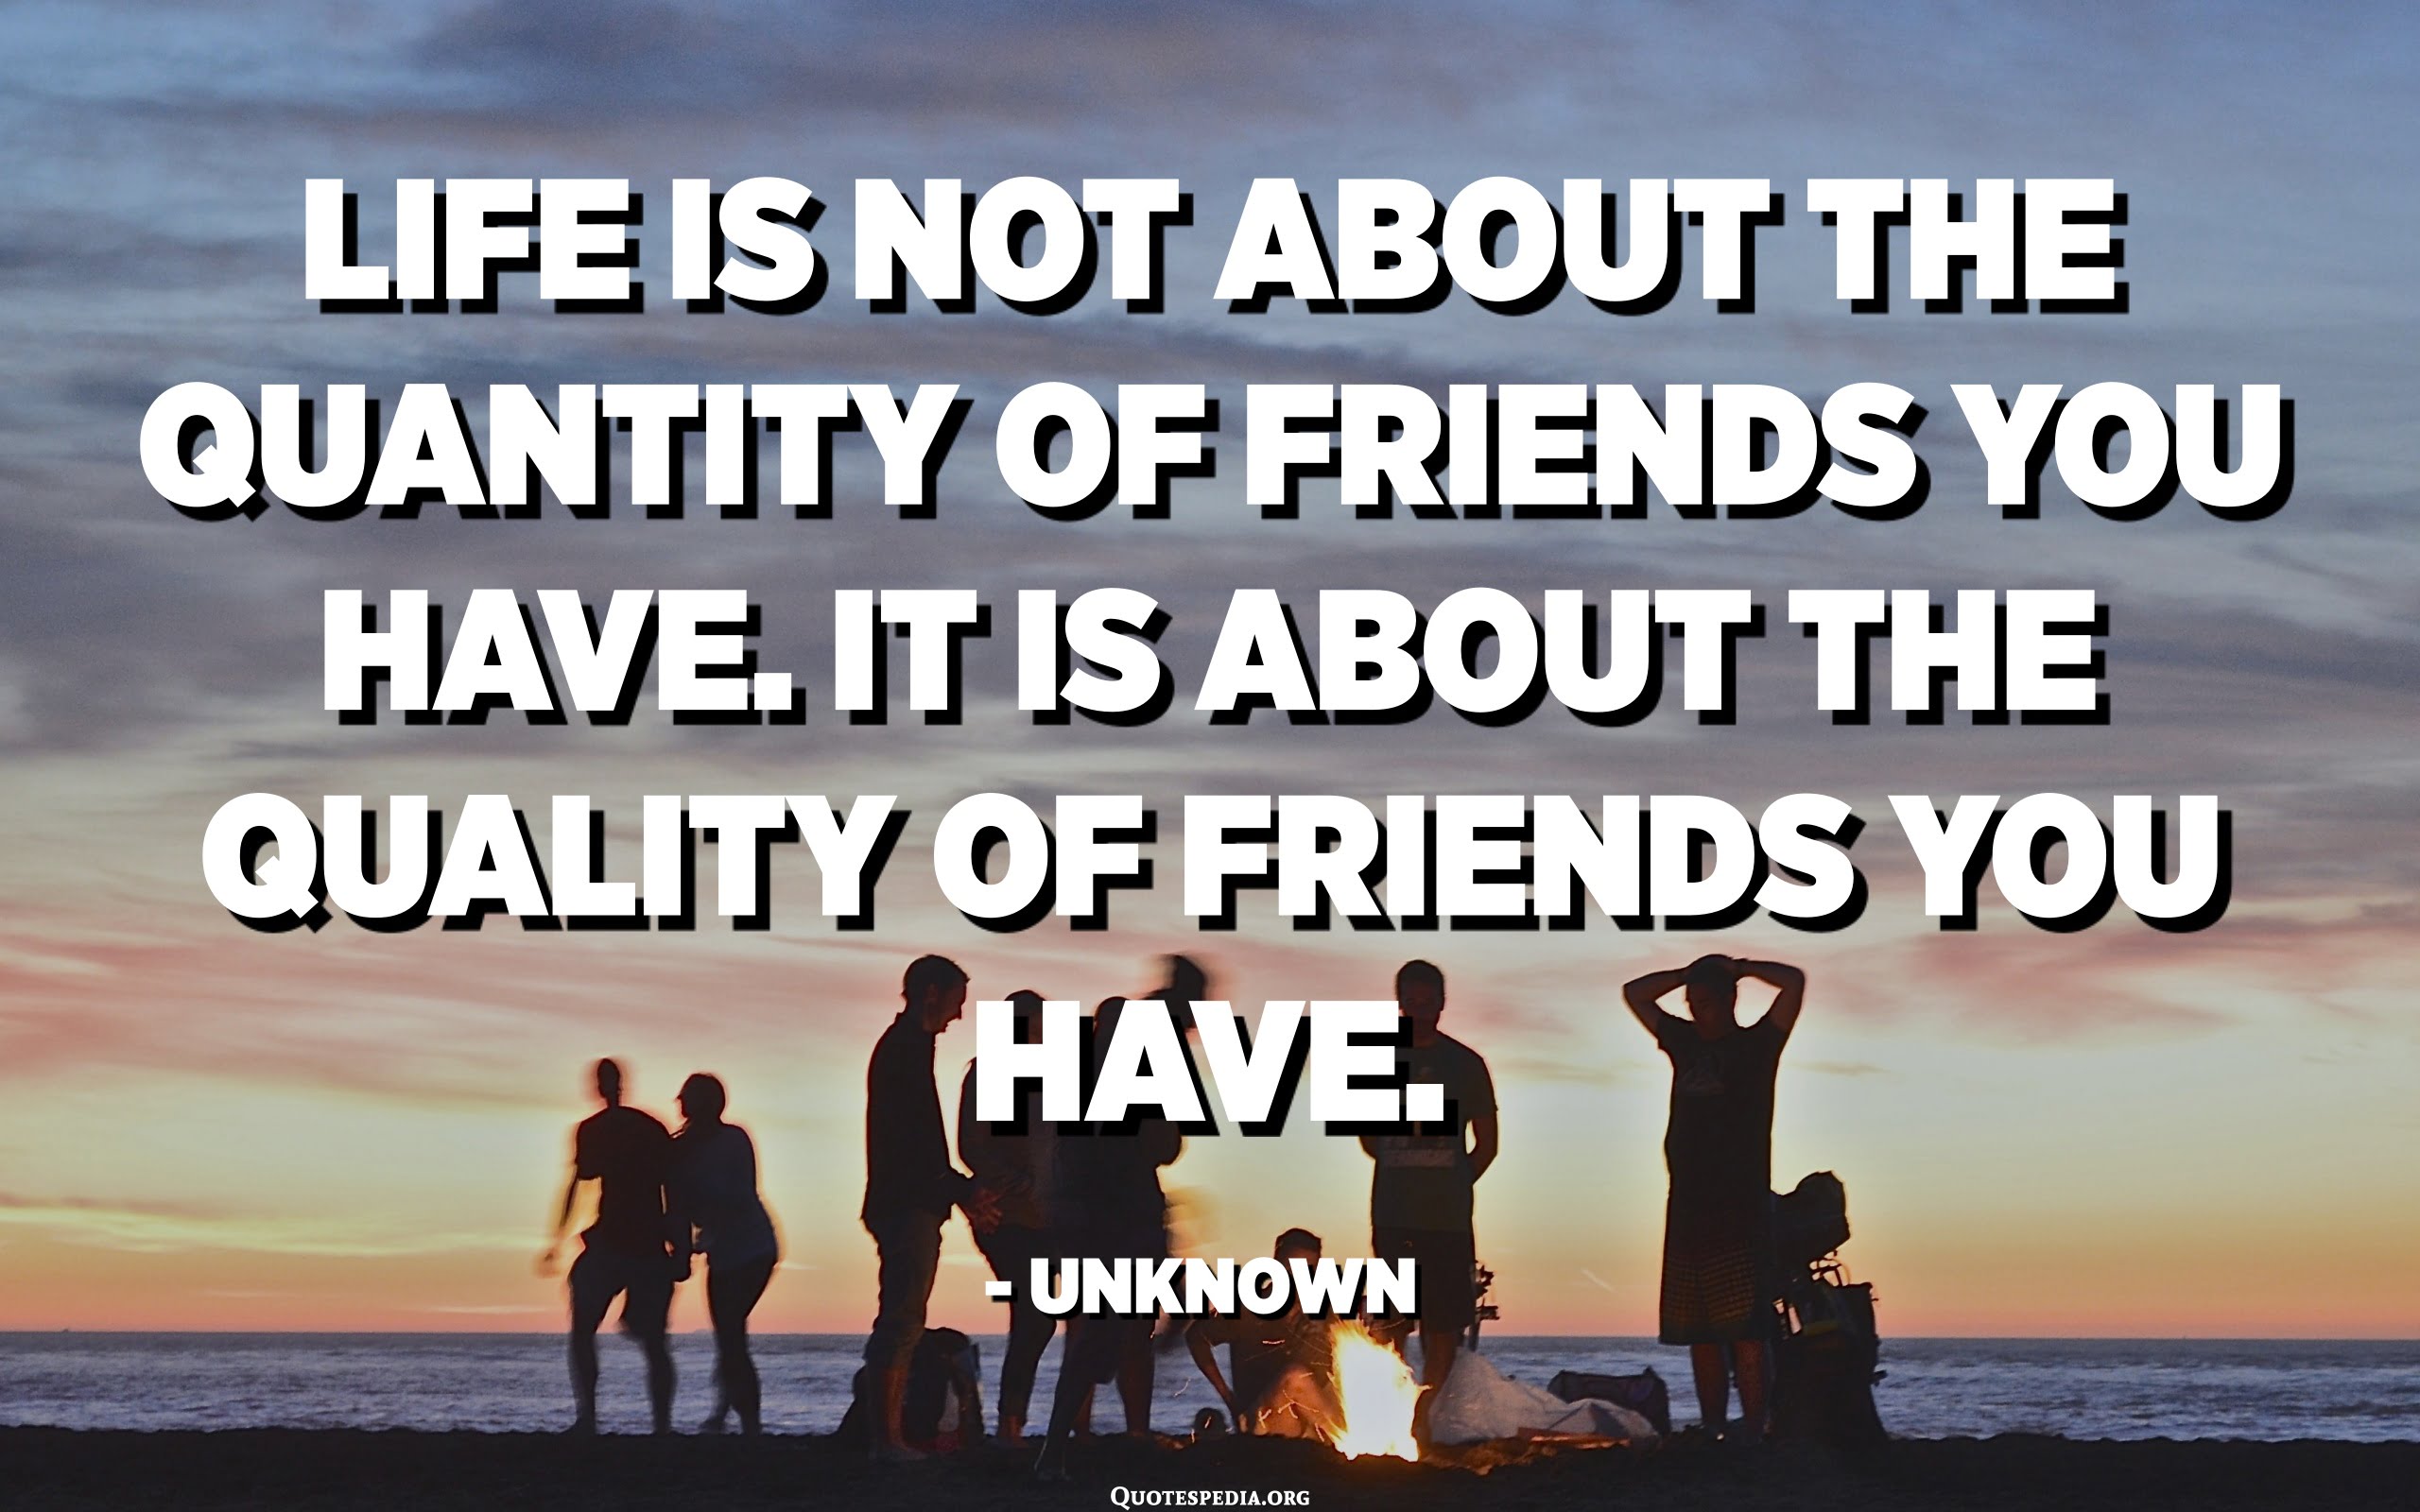 Friendship is About Quality Not Quantity